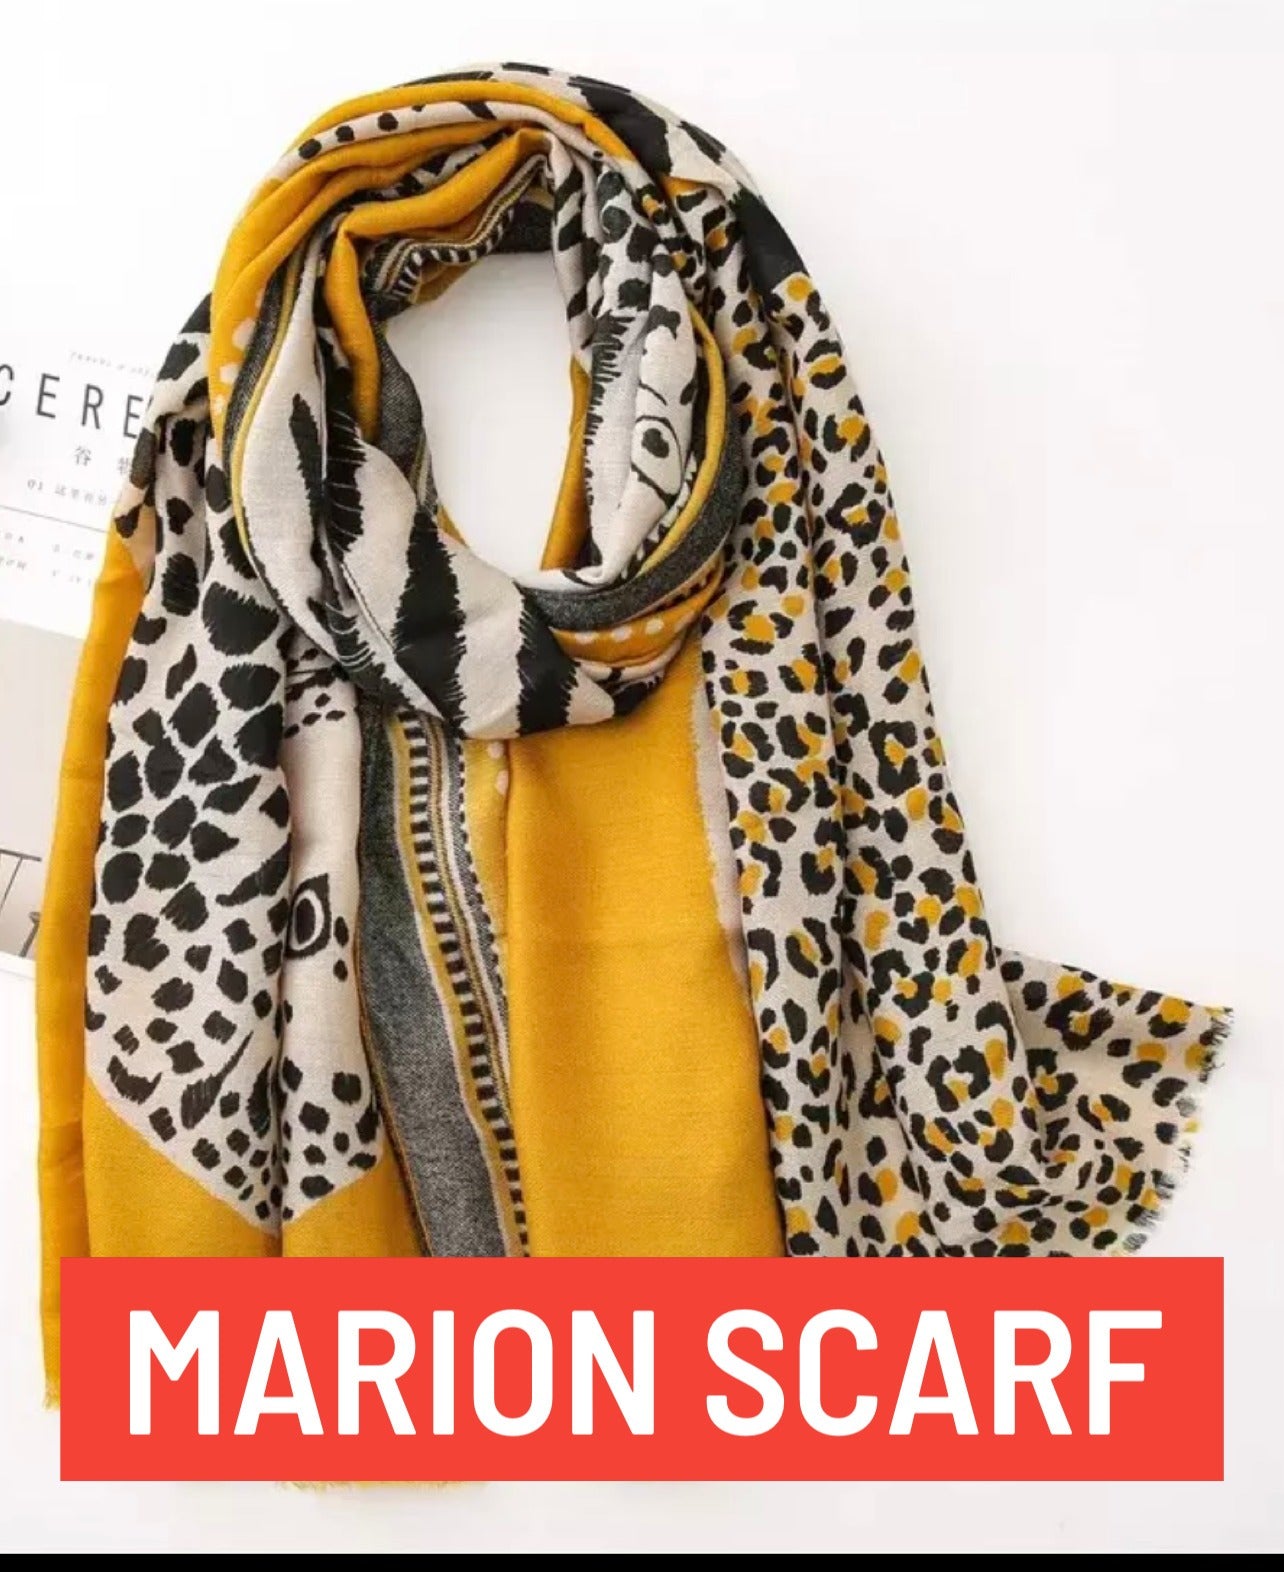 Text Marion Scarf display, yellow and black,. leopard print